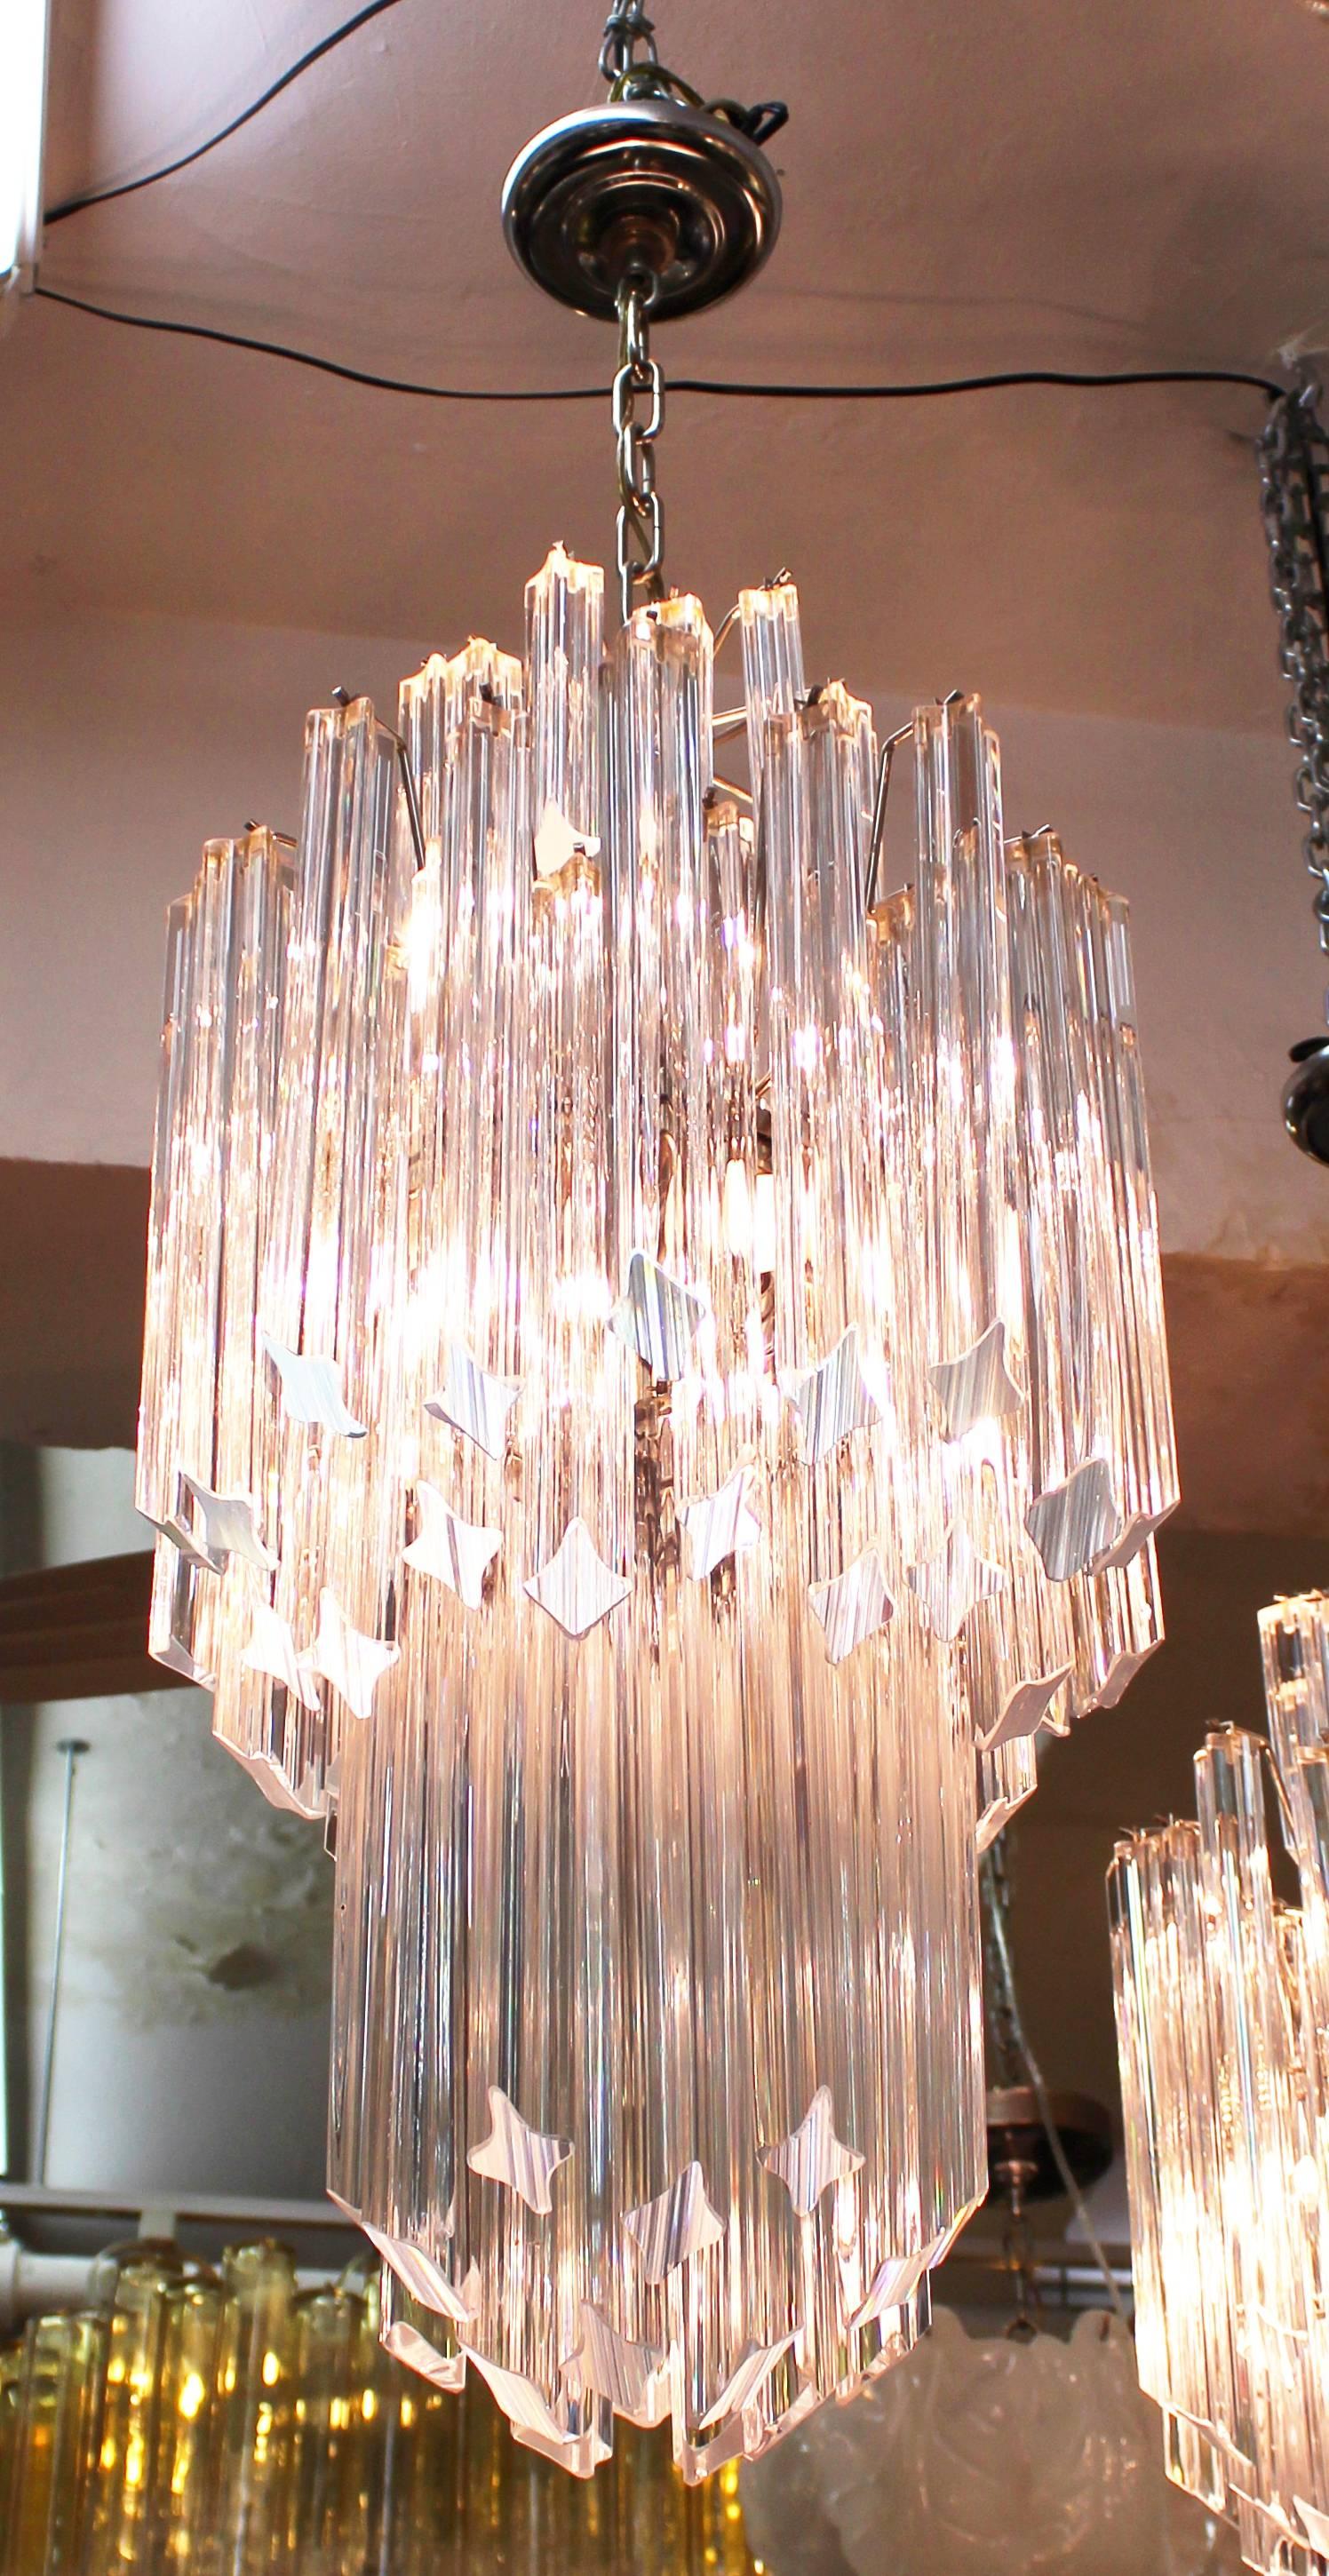 Mid-Century Modern Italian Murano glass chandelier with Venini prisms. Only one is available. It has been rewired and is in great condition, with minor chips on a few of the prisms.